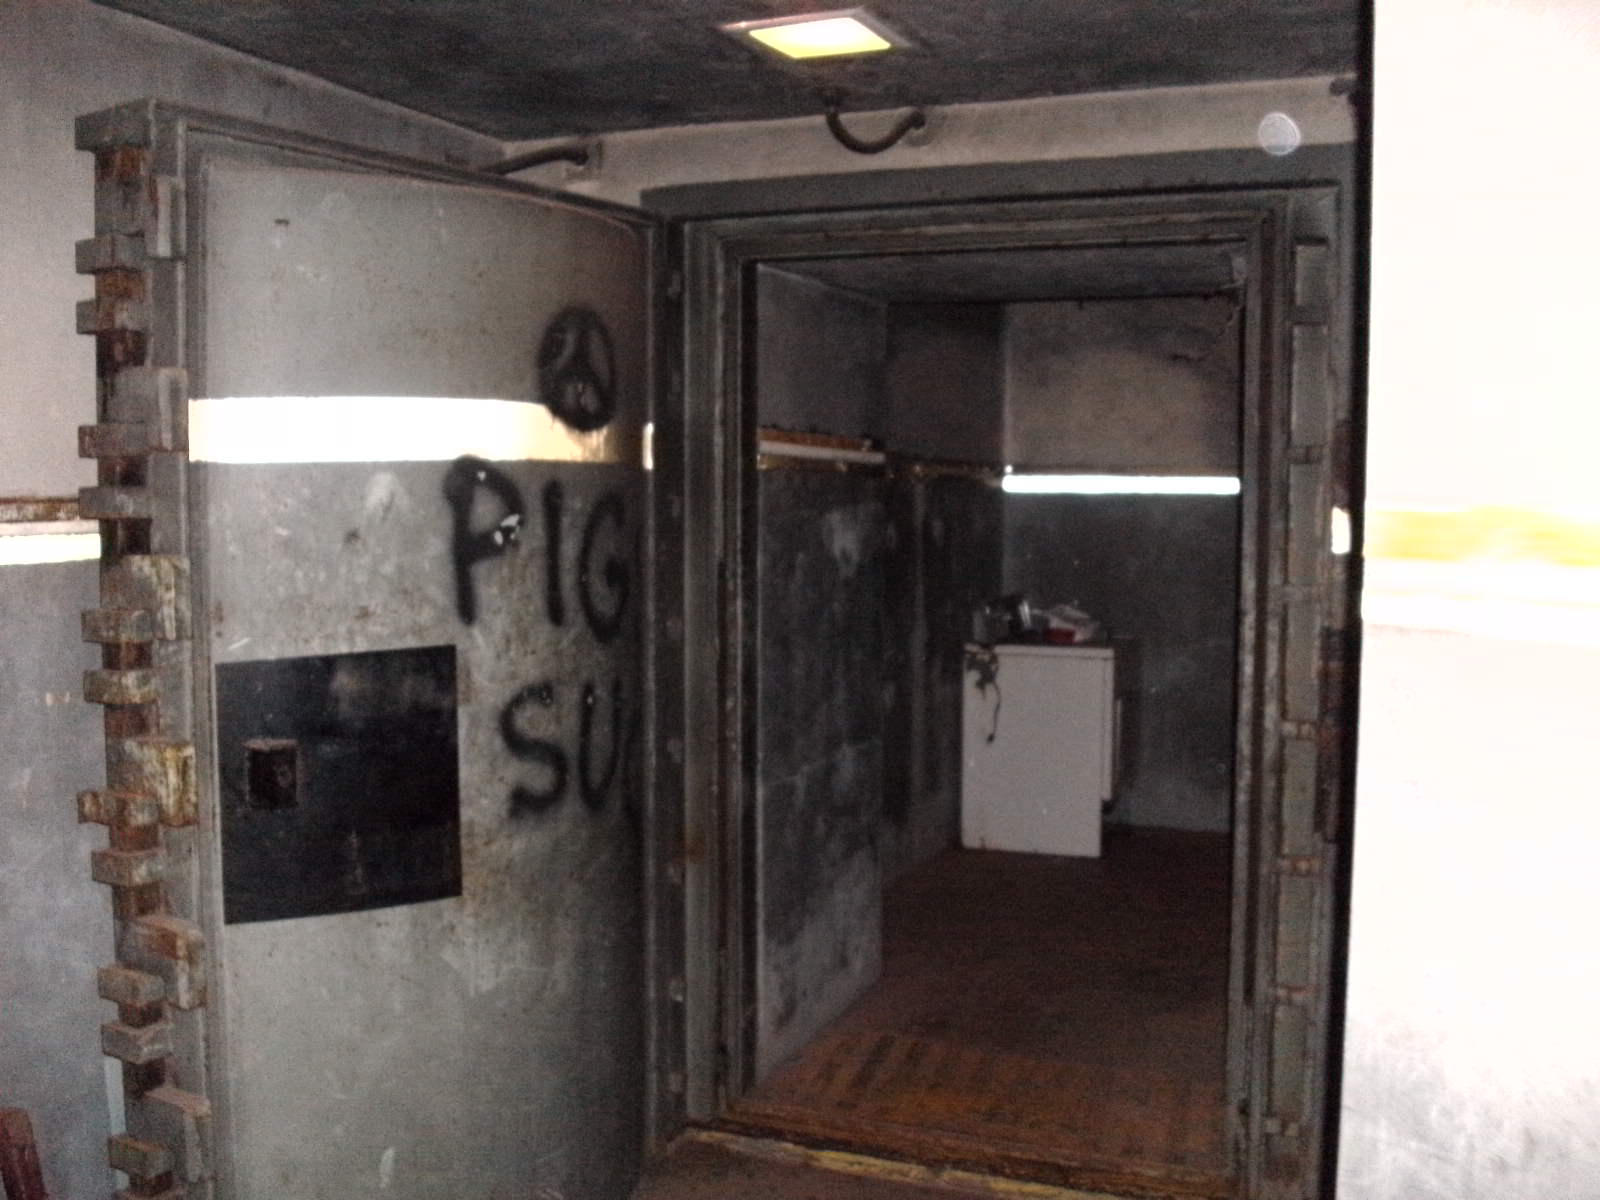 Surface to control room outer blast door